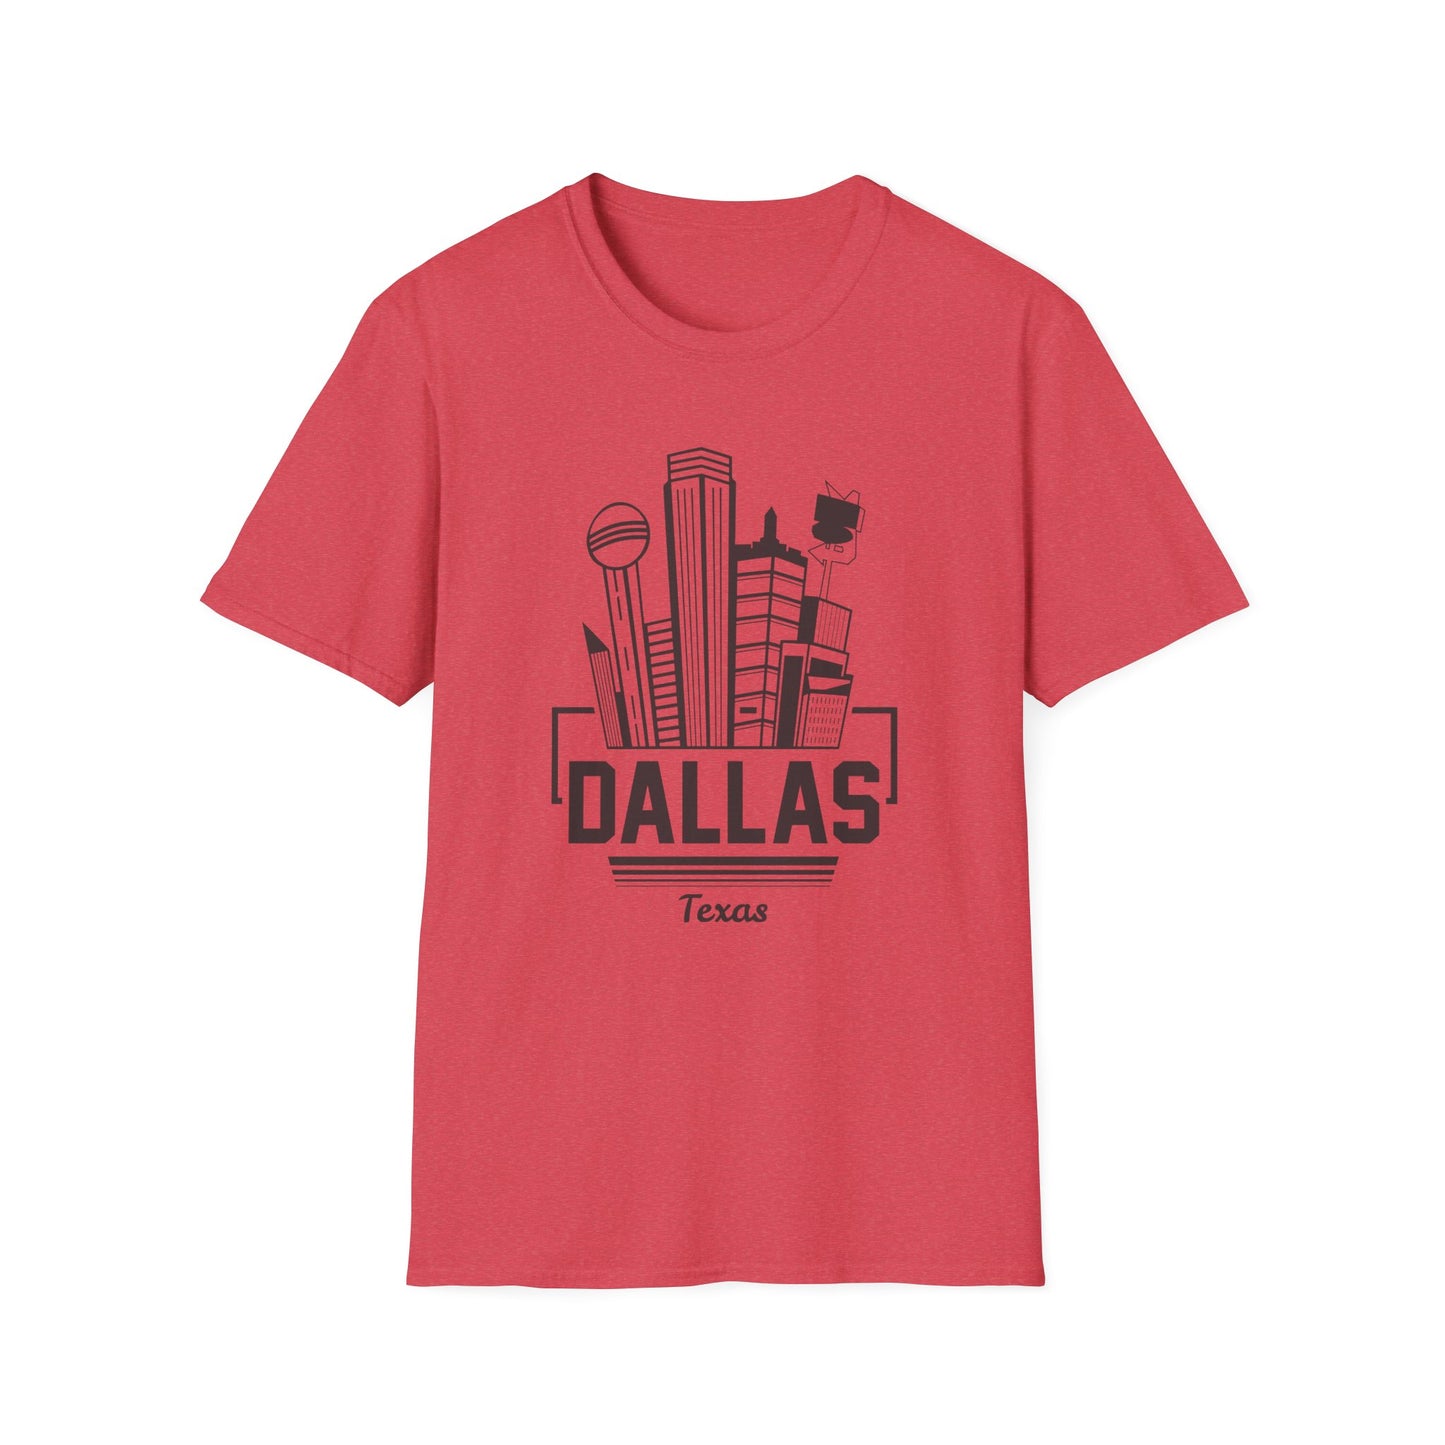 Dallas Vibes: Stylish and Comfortable T-Shirt for True Texas Enthusiasts